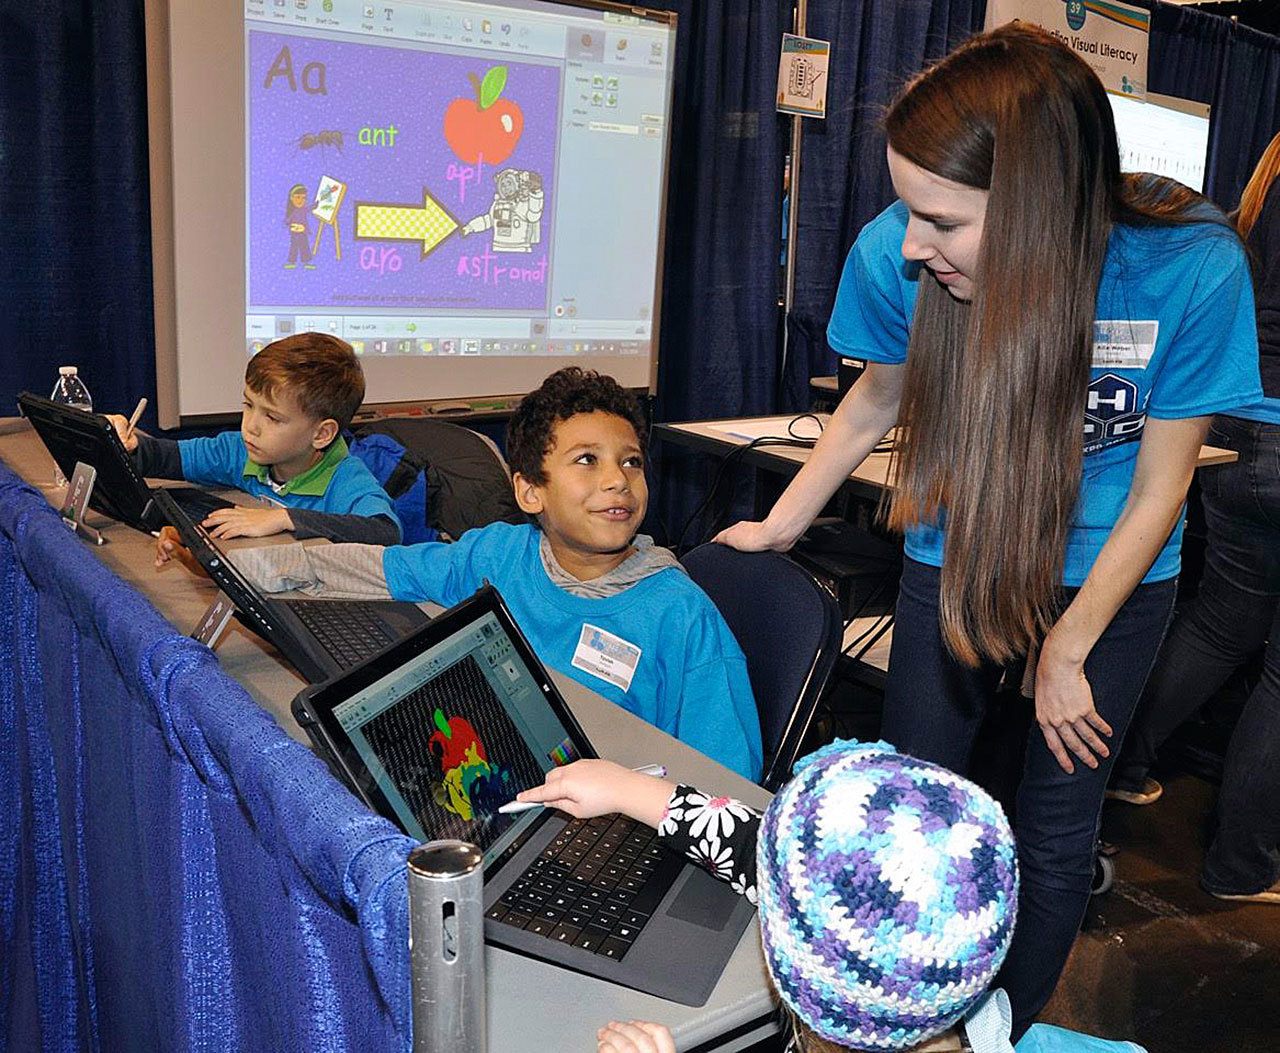 Teacher Allie Weber helps students use computers during last year’s Tech Expo at the ShoWare Center. The event returns to the venue next Thursday, Jan. 19. HEIDI SANDERS, Kent Reporter